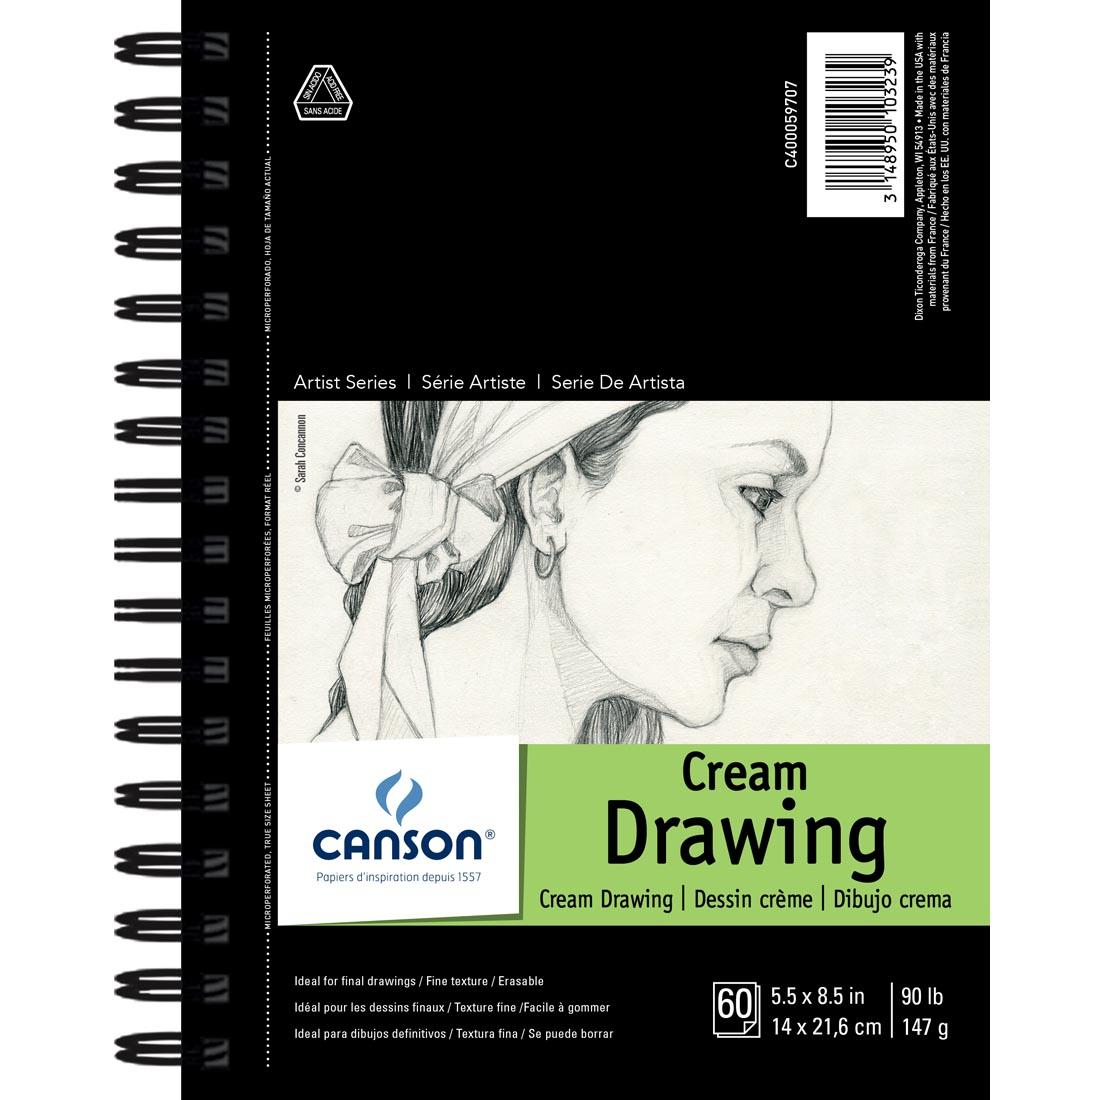 Canson Artist Series Cream Drawing Pad